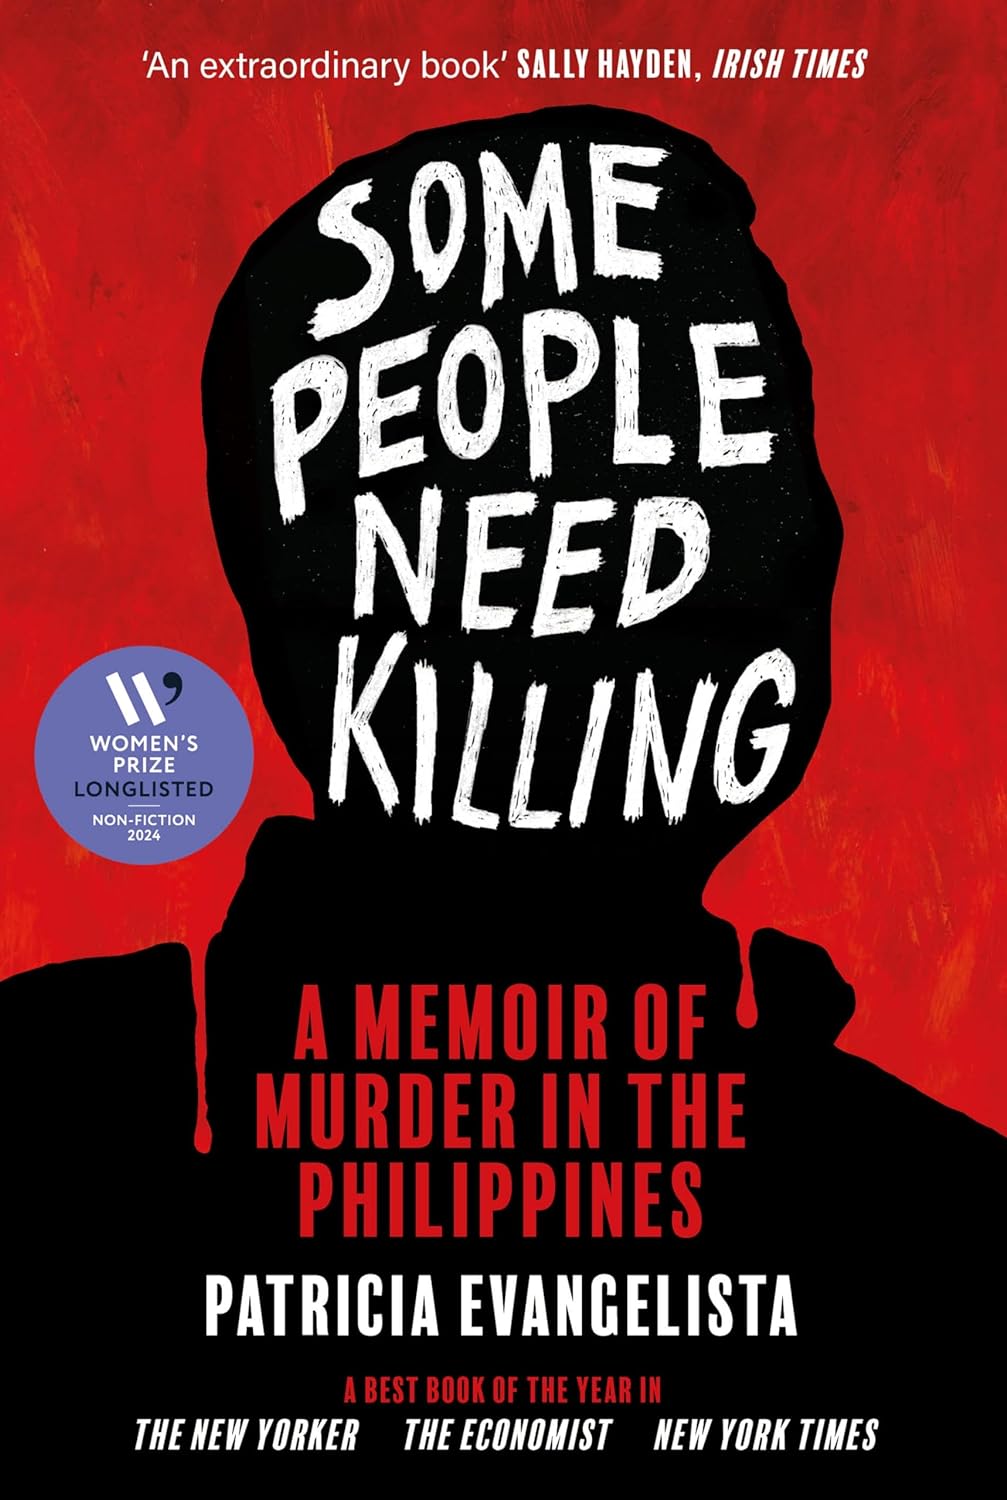 Cover of "Some People Need Killing" by Patricia Evangelista